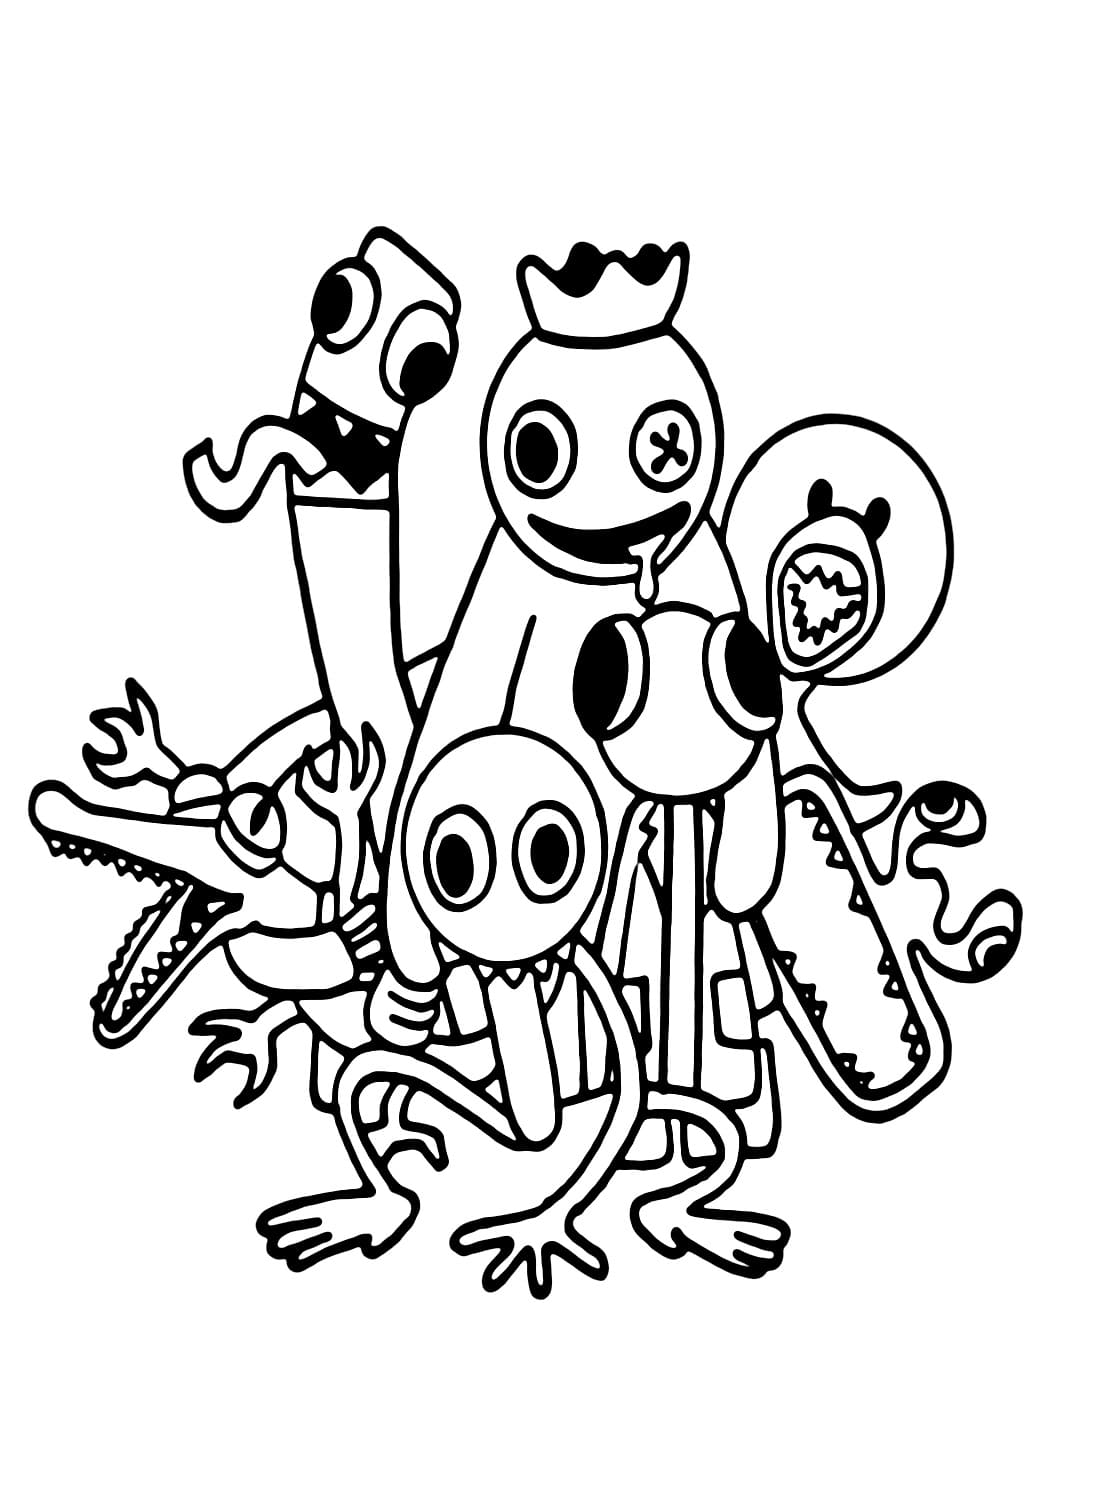 Characters in Rainbow Friends coloring page - Download, Print or Color ...